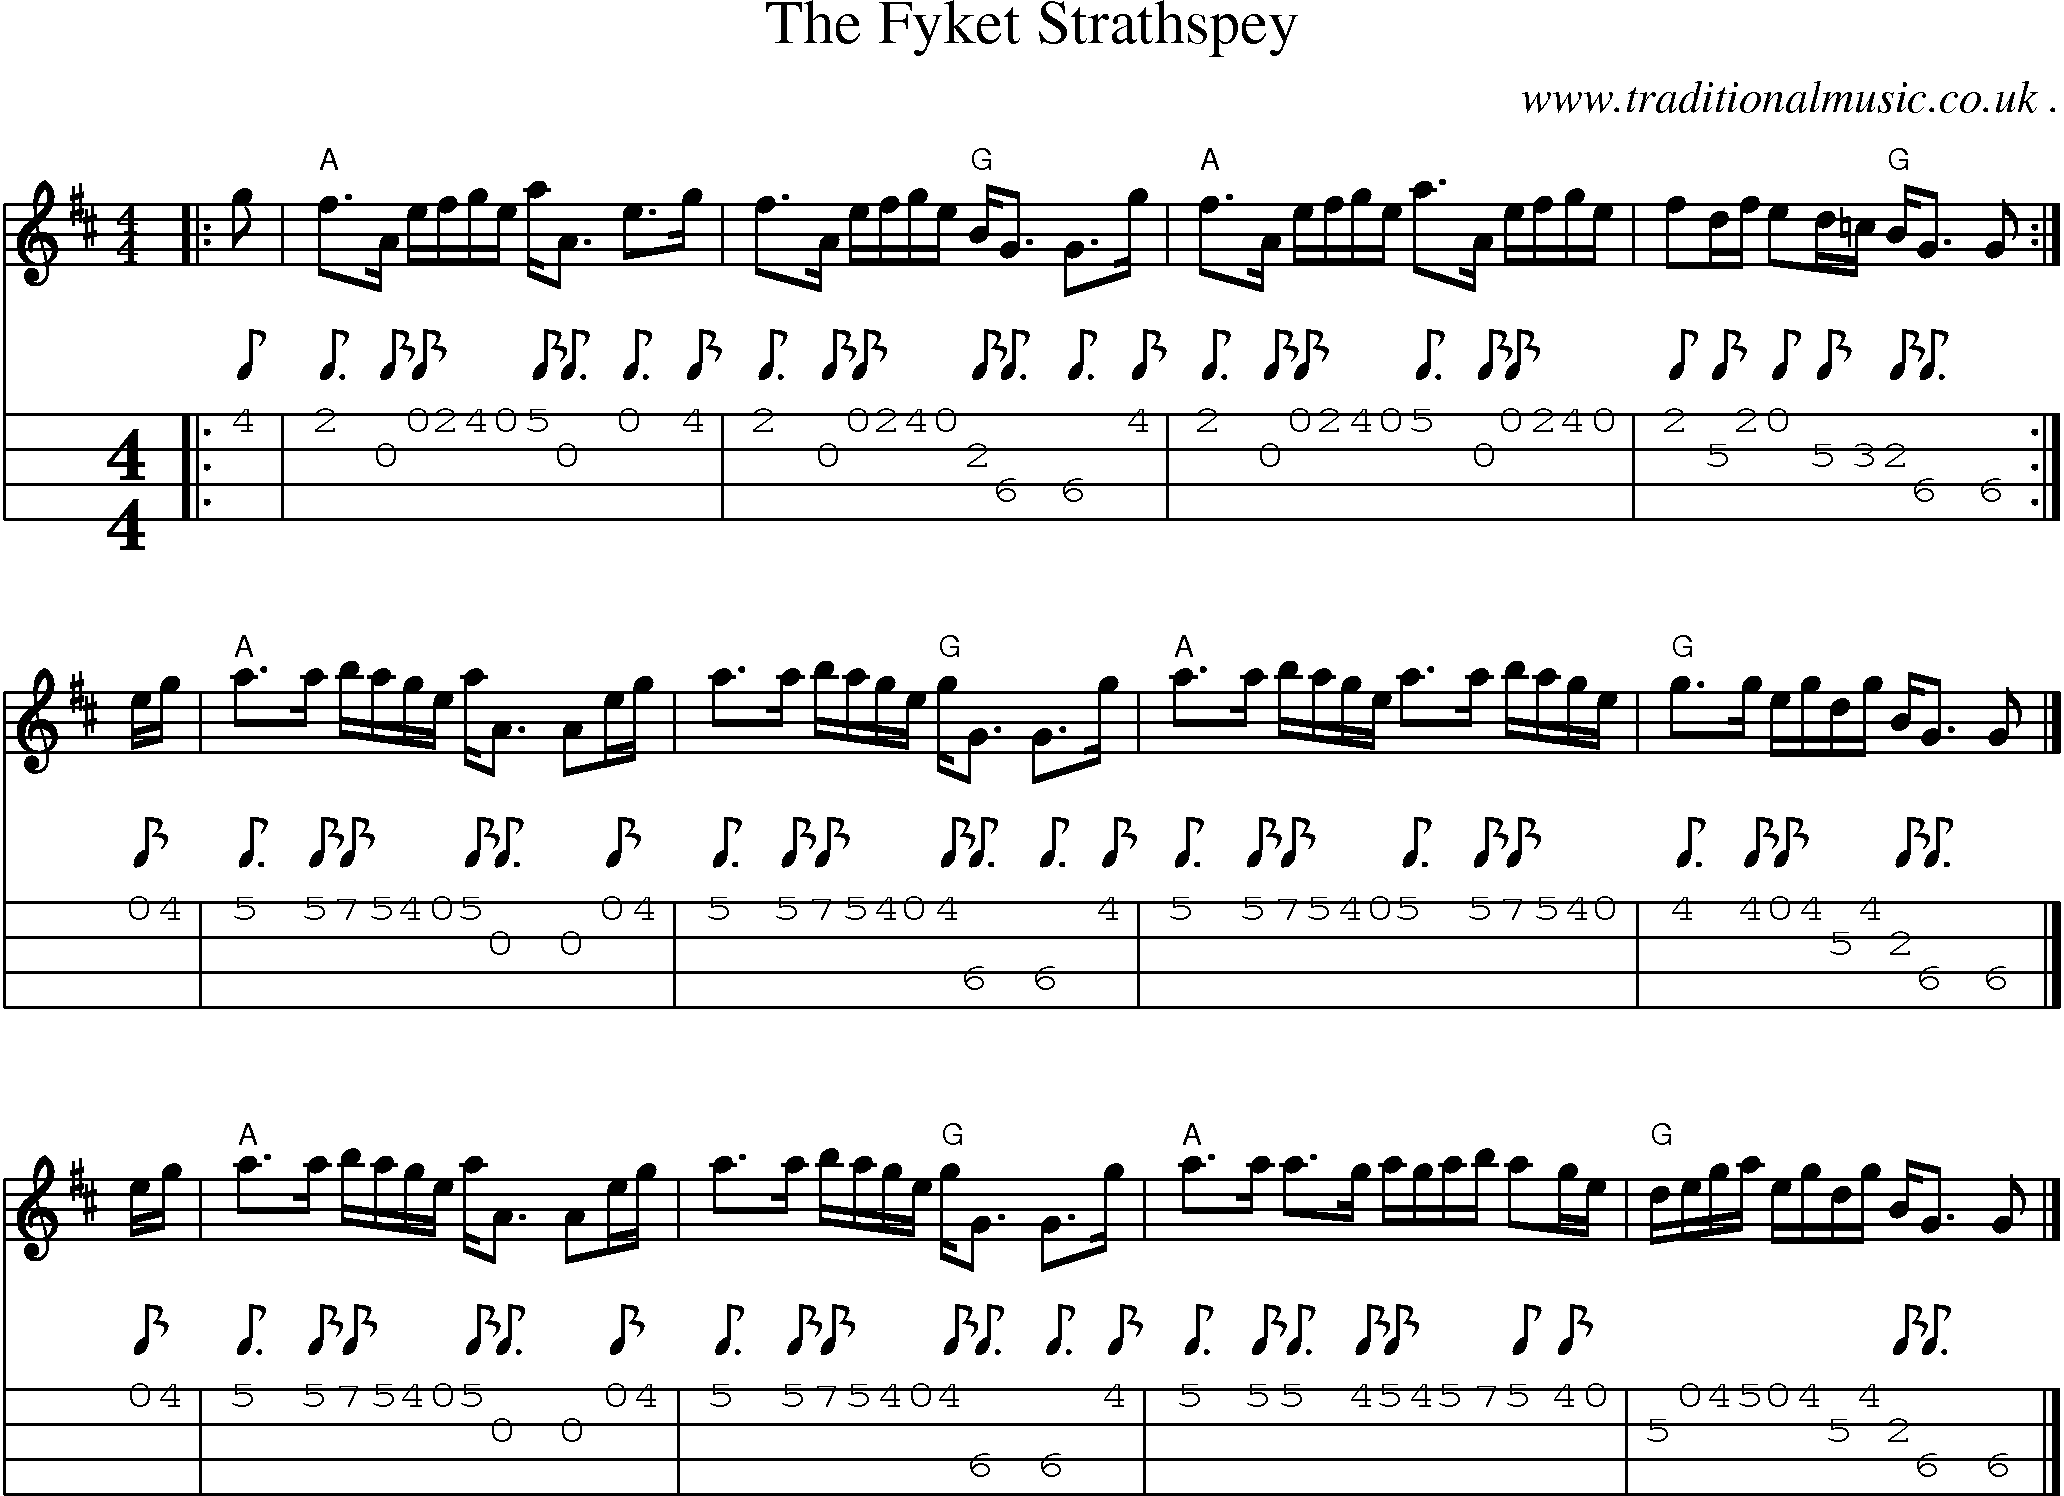 Sheet-music  score, Chords and Mandolin Tabs for The Fyket Strathspey